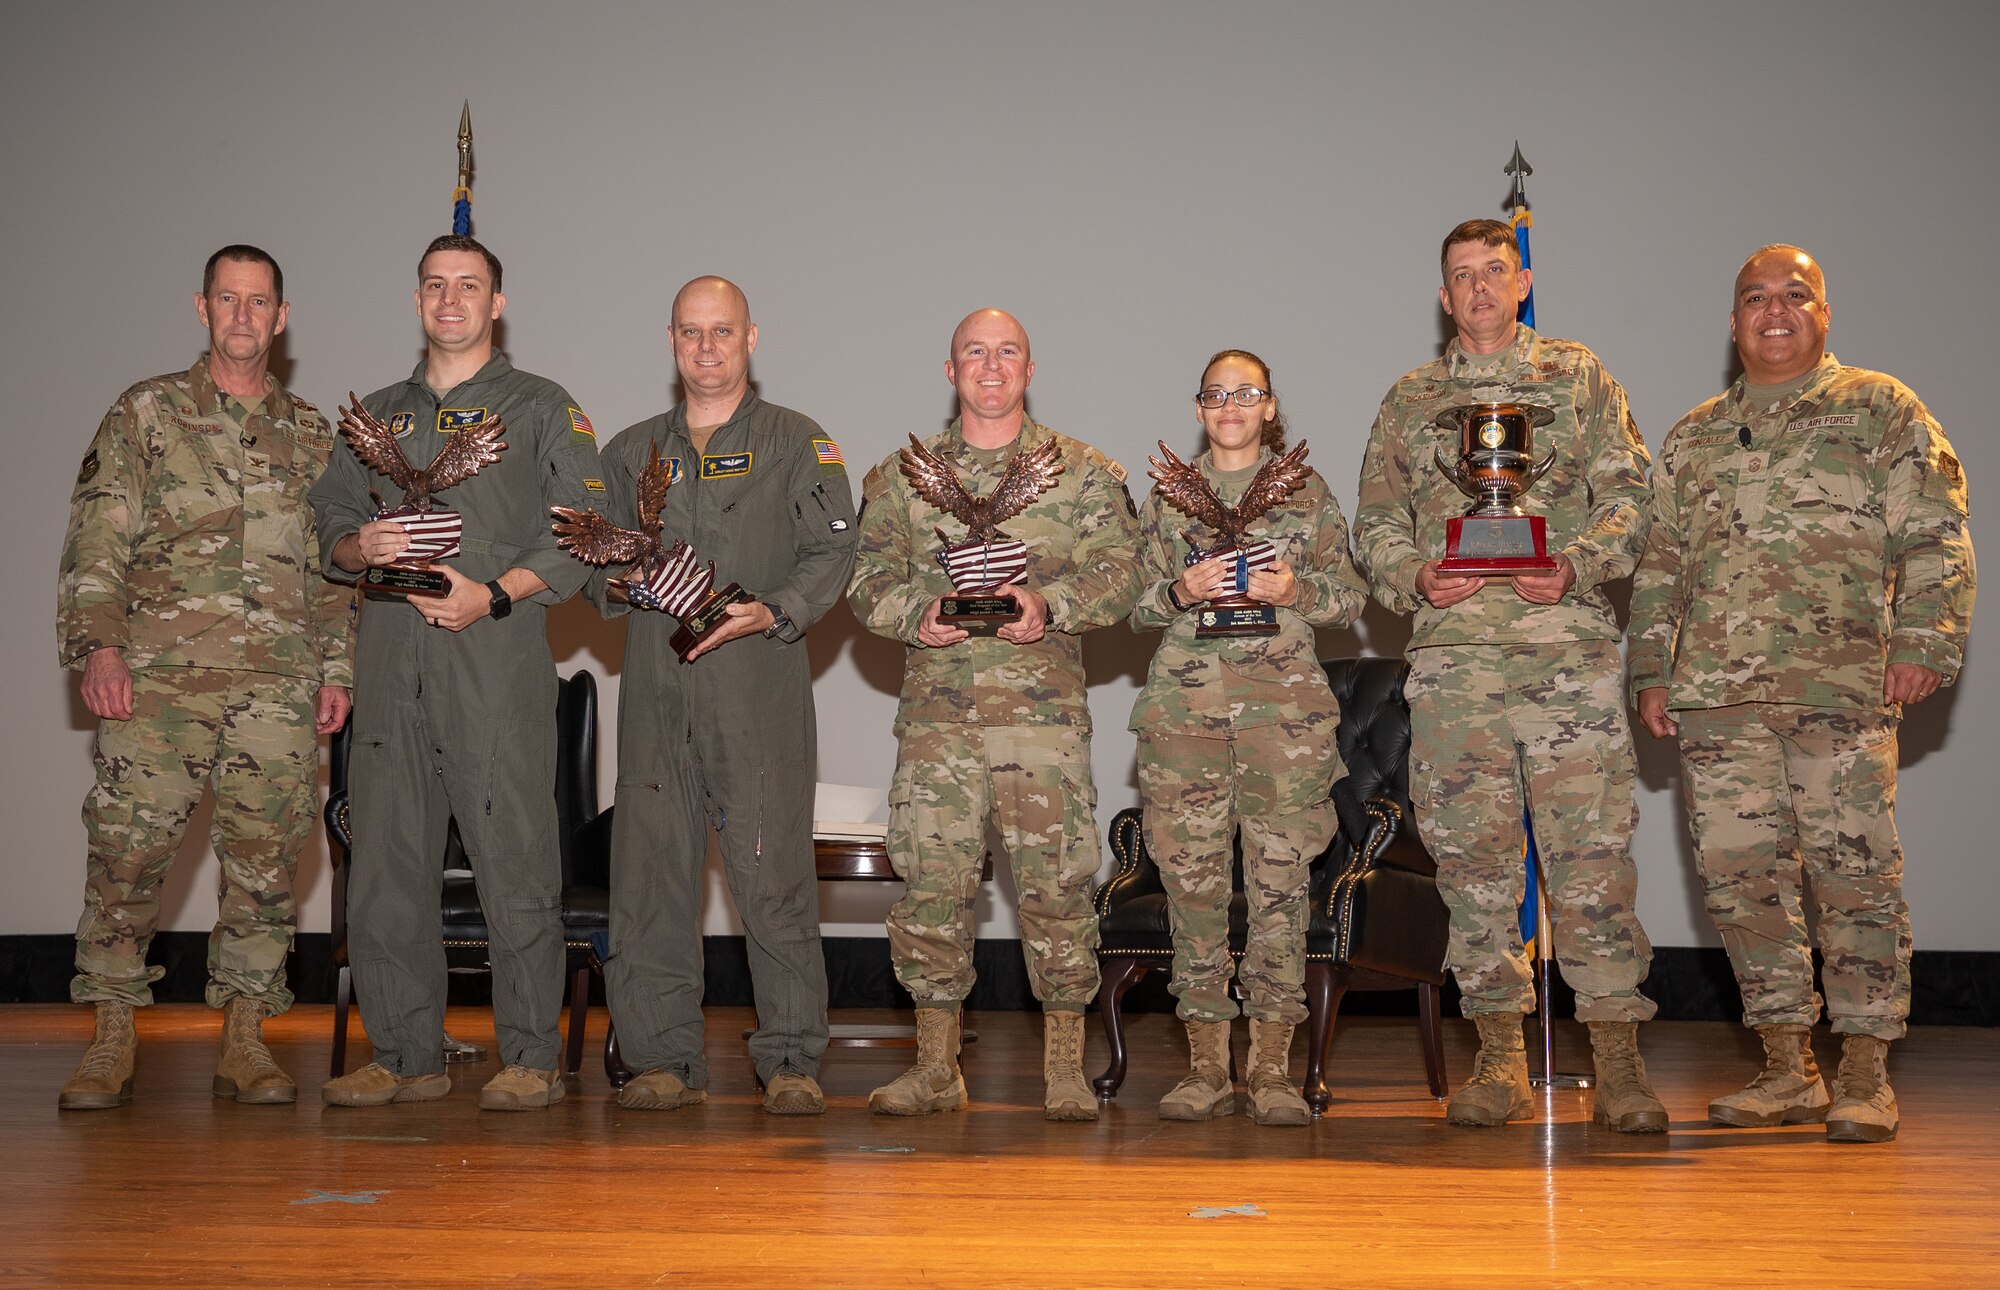 The 315th Airlift Wing hosted its annual awards ceremony to highlight the accomplishments of the wing and its members, March 18, 2023, at Joint Base Charleston, South Carolina. Col. John Robinson, 315 AW commander, and Chief Master Sgt. Joe Gonzalez, 315 AW command chief, hosted the ceremony to recognize and award exceptional Airmen for their 2022 performance and celebrate the wing's achievement of receiving the distinguished Raincross Trophy from the Fourth Air Force, headquartered at March Air Reserve Base, California.